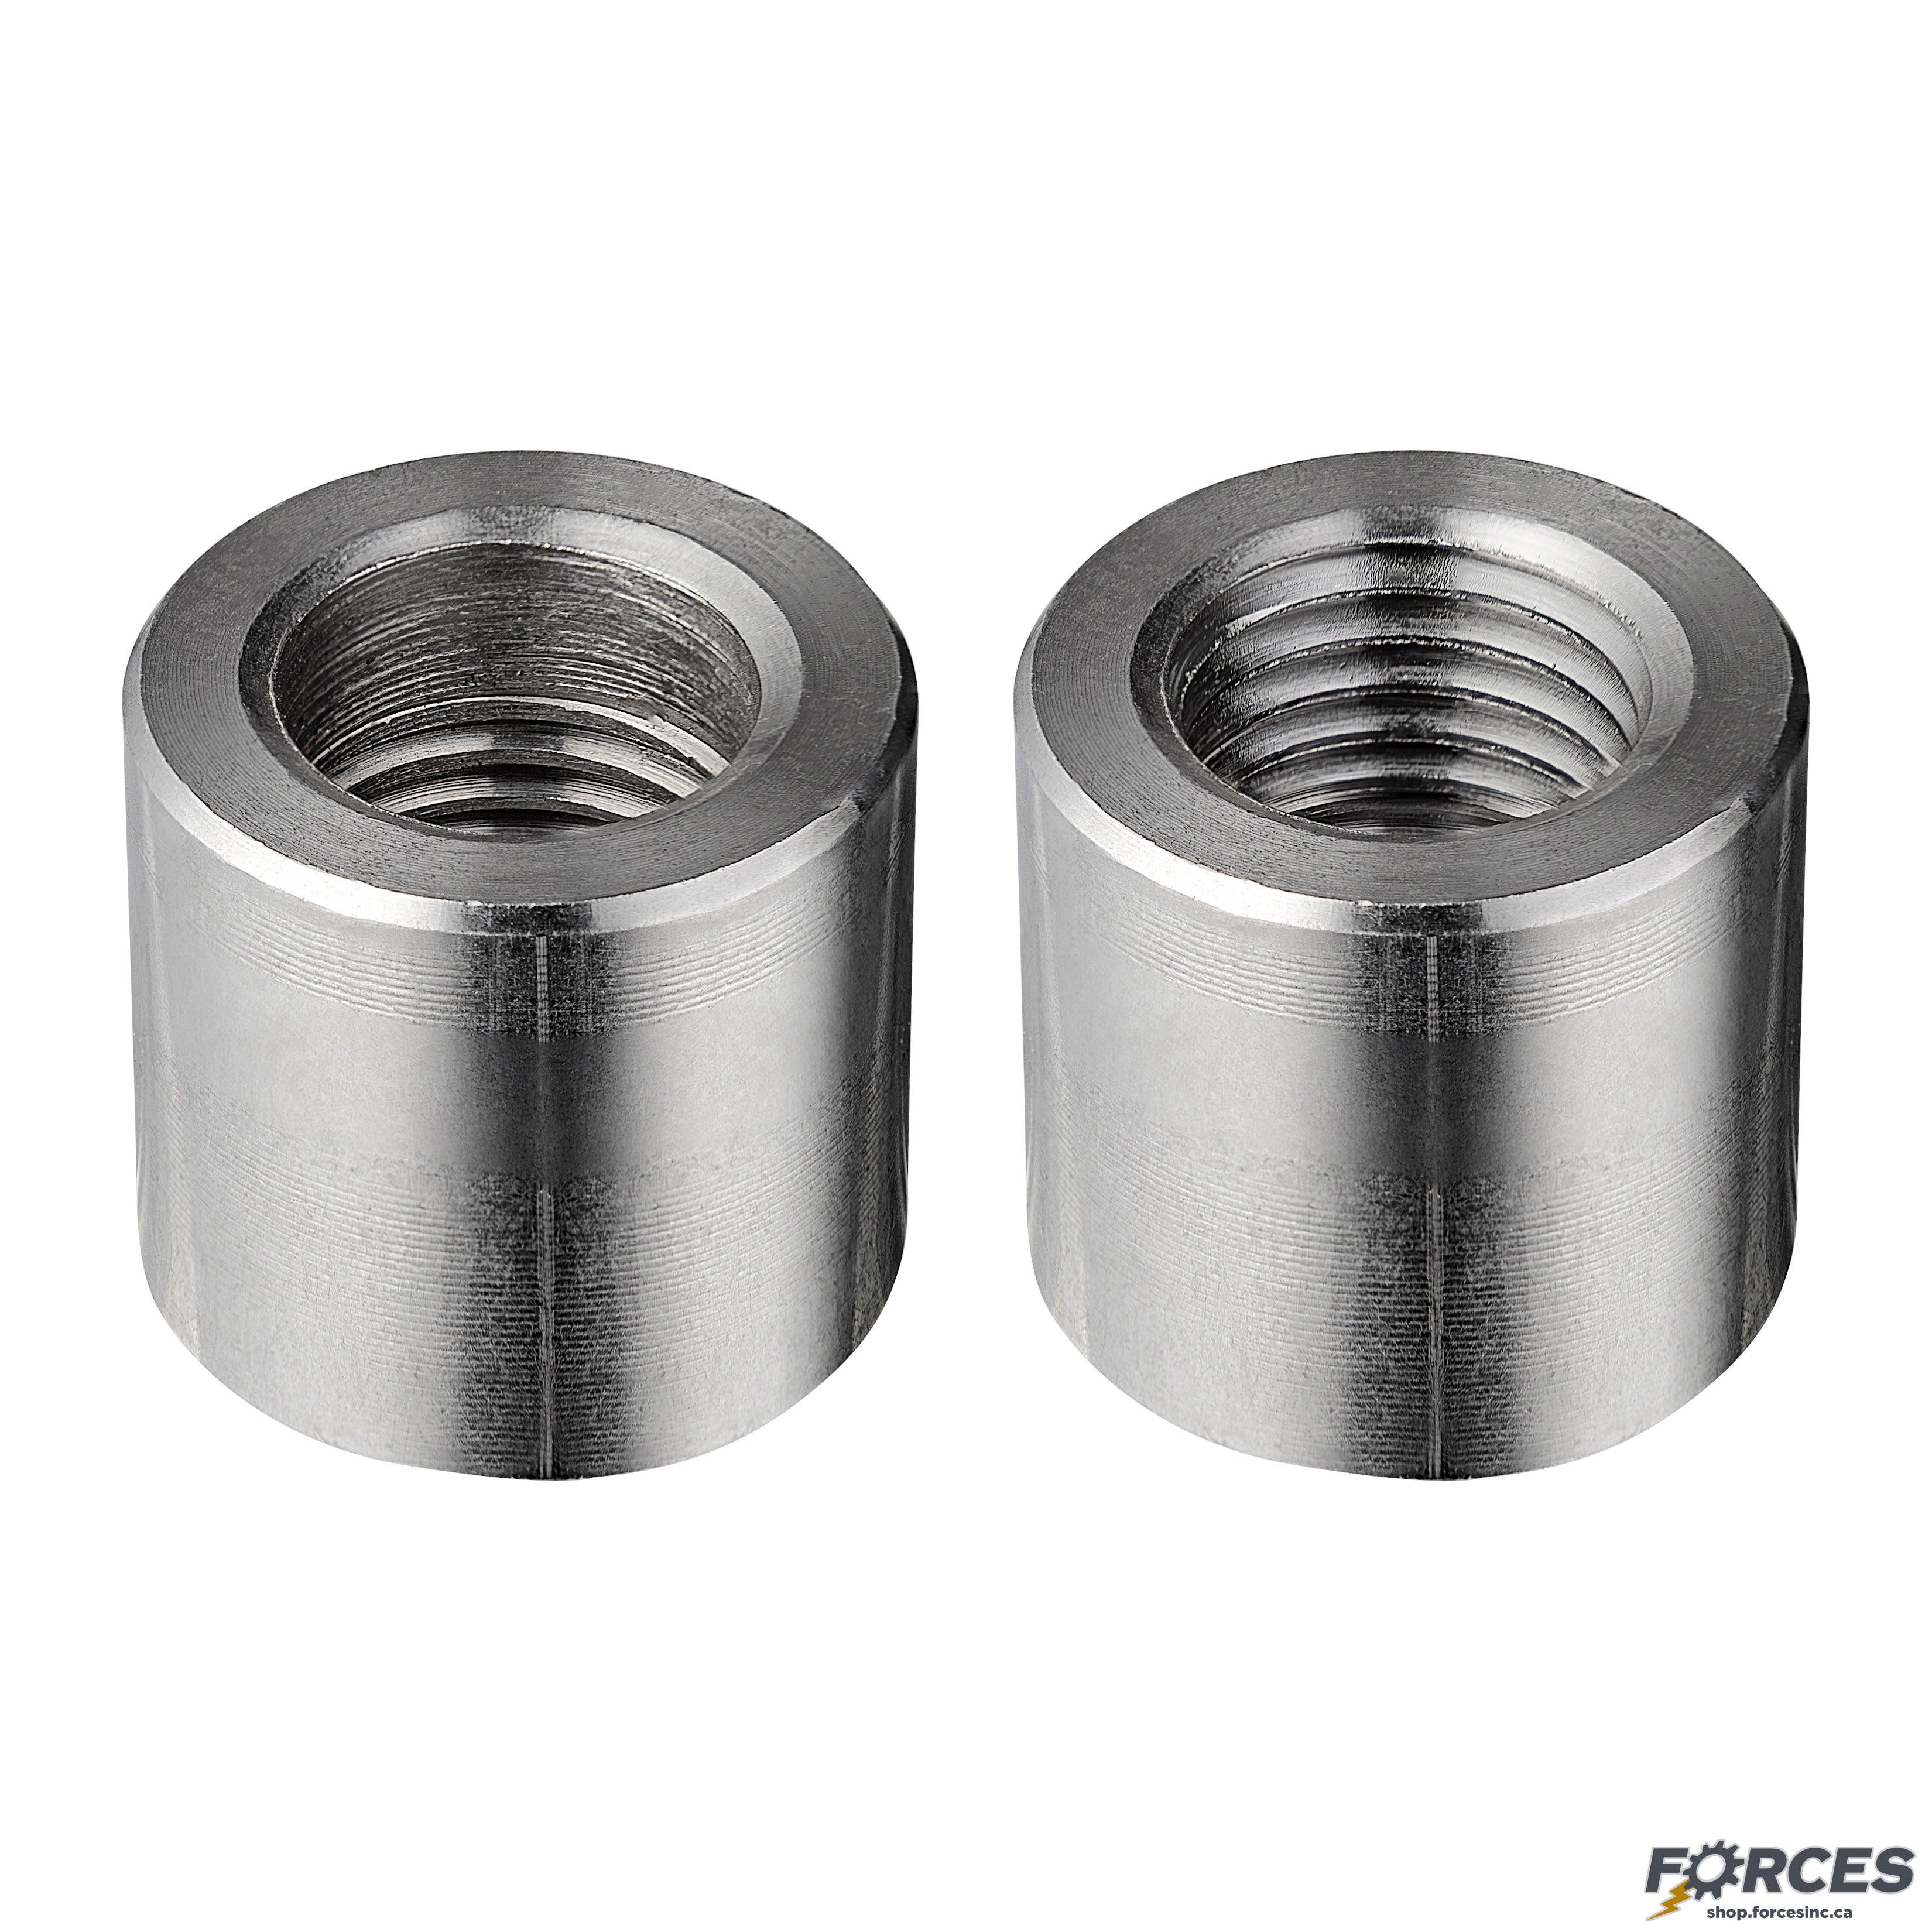 1/2" Half-Coupling NPT #3000 - Stainless Steel 316 - Forces Inc